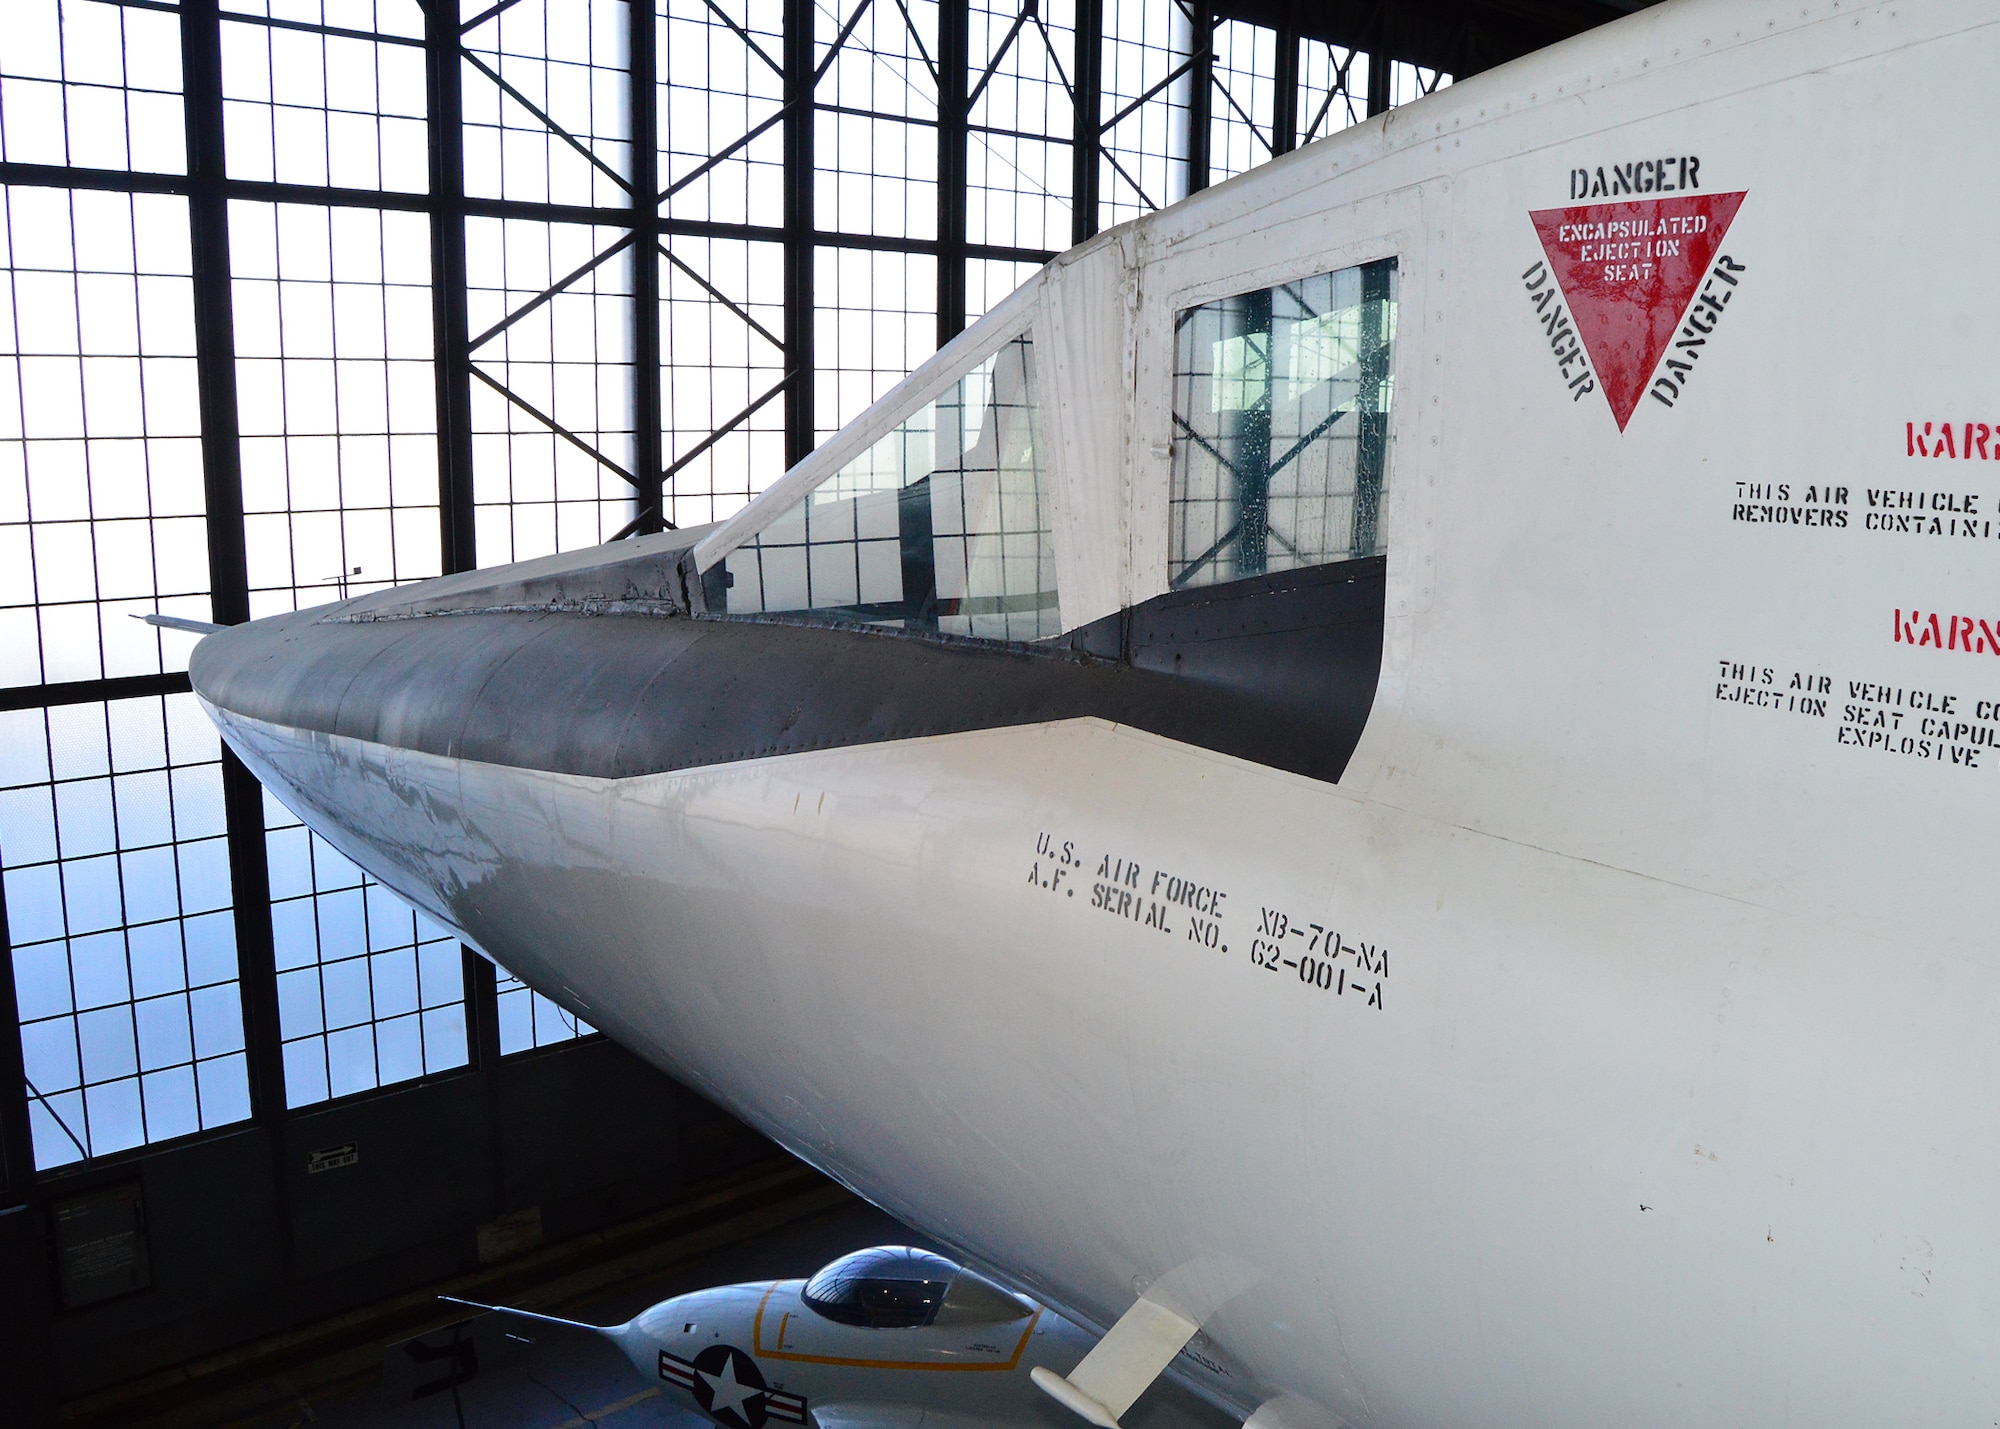 DAYTON, Ohio - North American XB-70 at the National Museum of the U.S. Air Force. (U.S. Air Force photo by Ken LaRock)